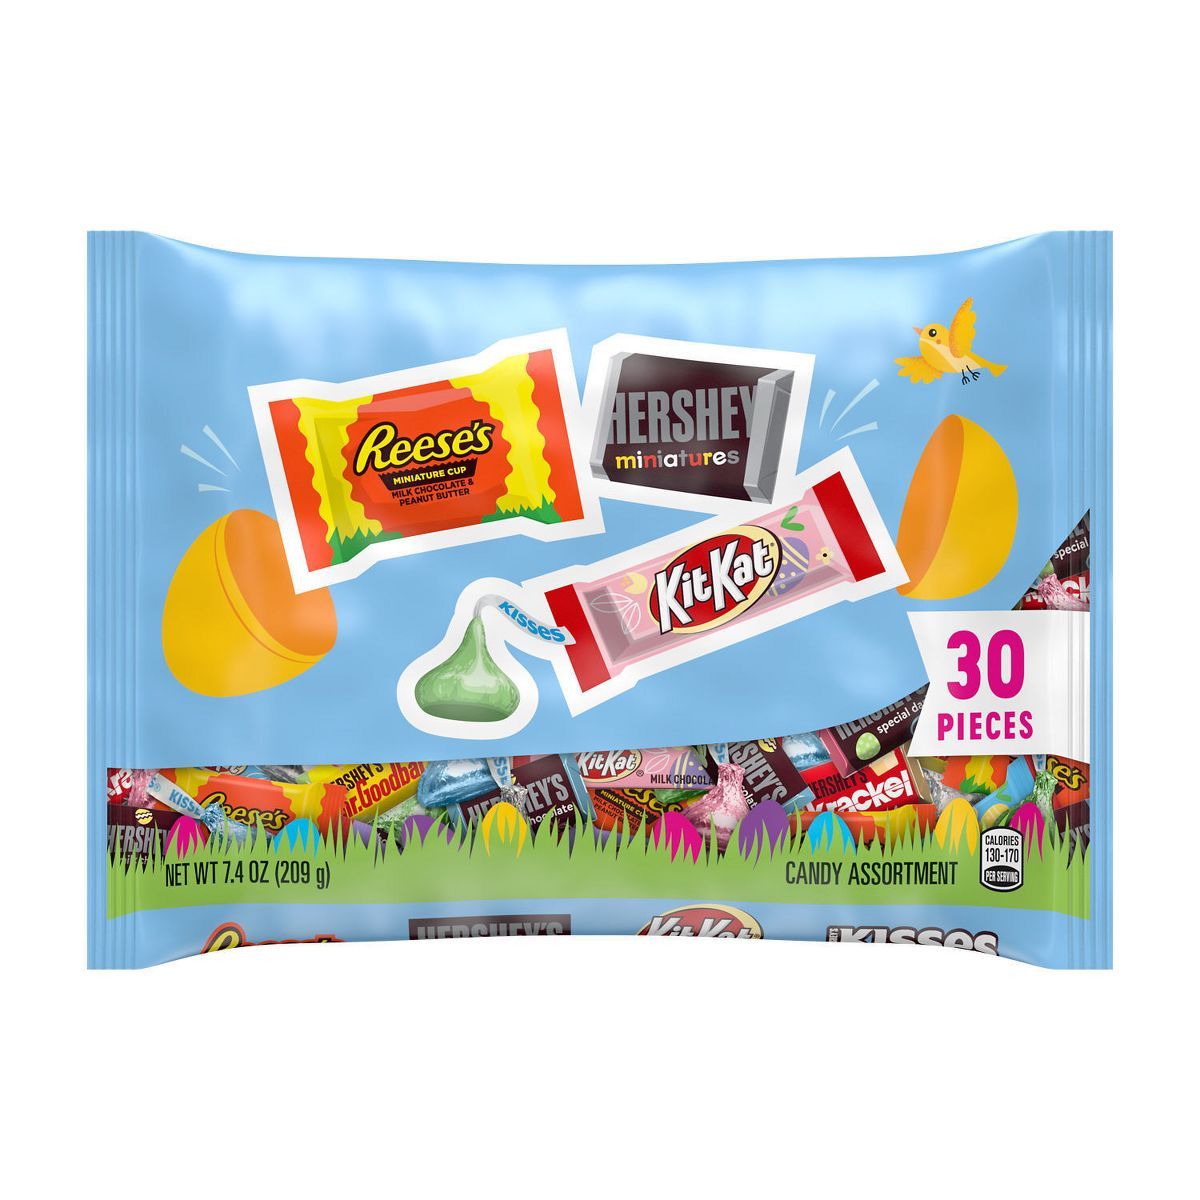 Hershey's, Kit Kat and Reese's Assorted Chocolate Easter Candy Bag - 30ct/7.4oz | Target